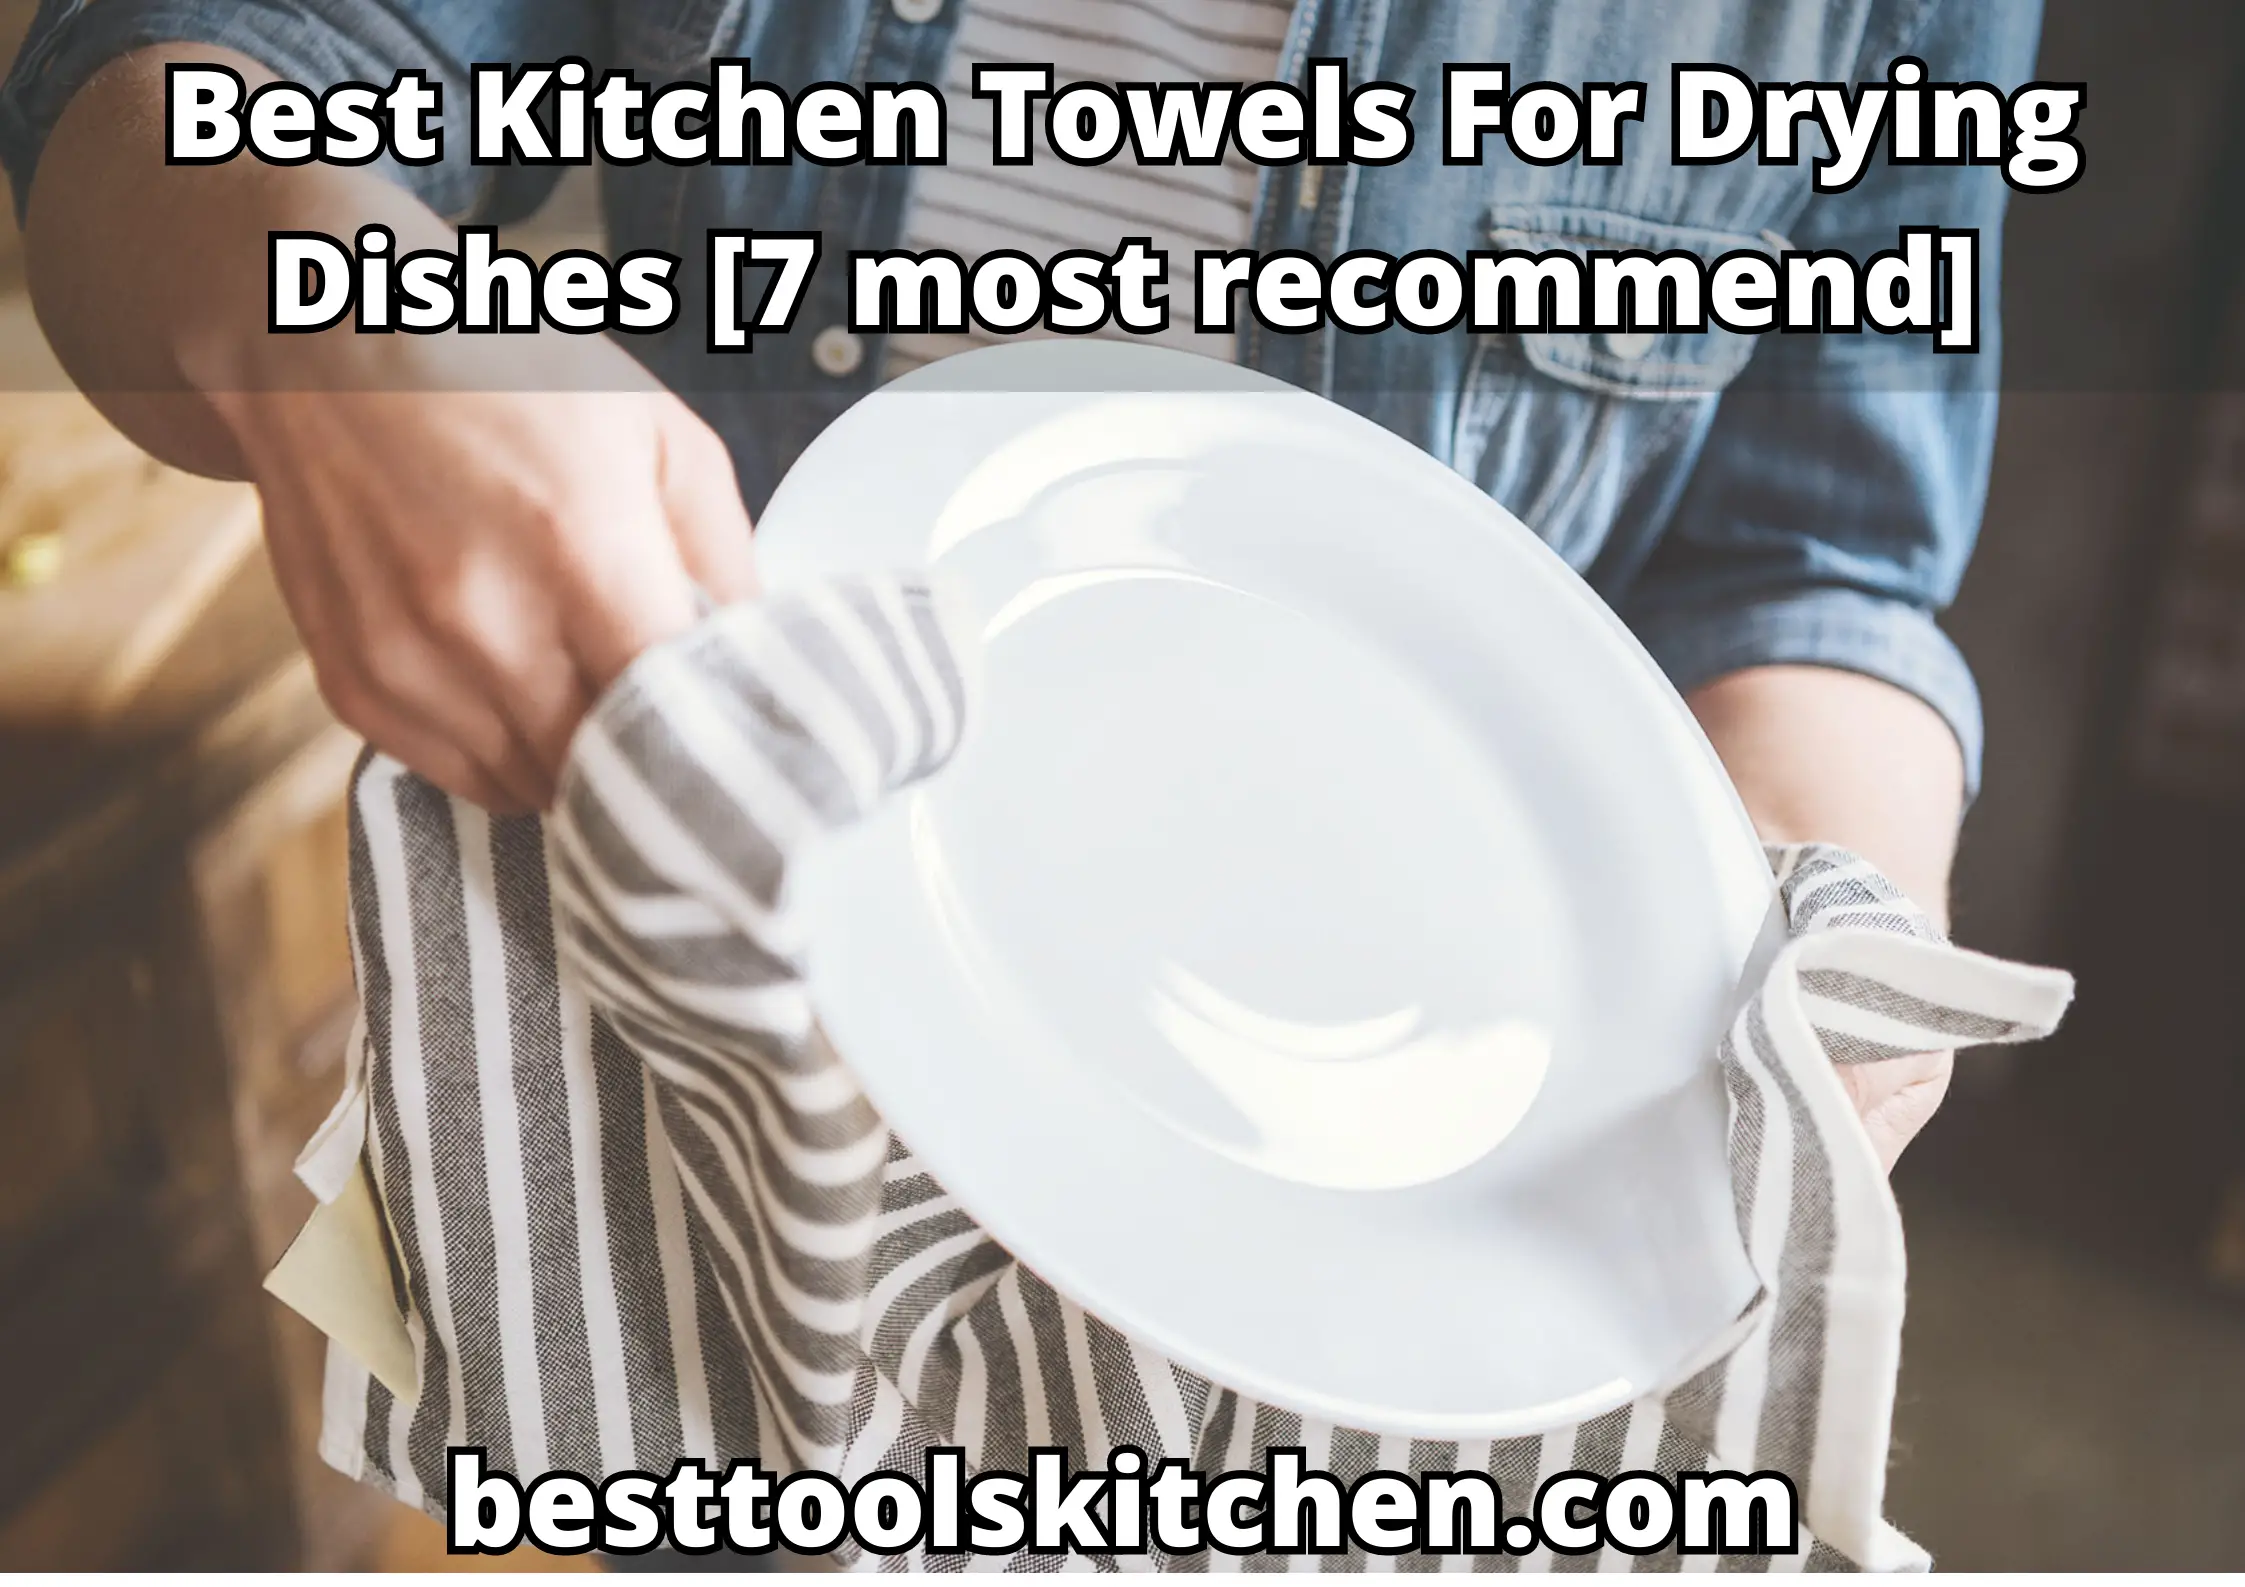 Best Kitchen Towels For Drying Dishes [7 most recommend]